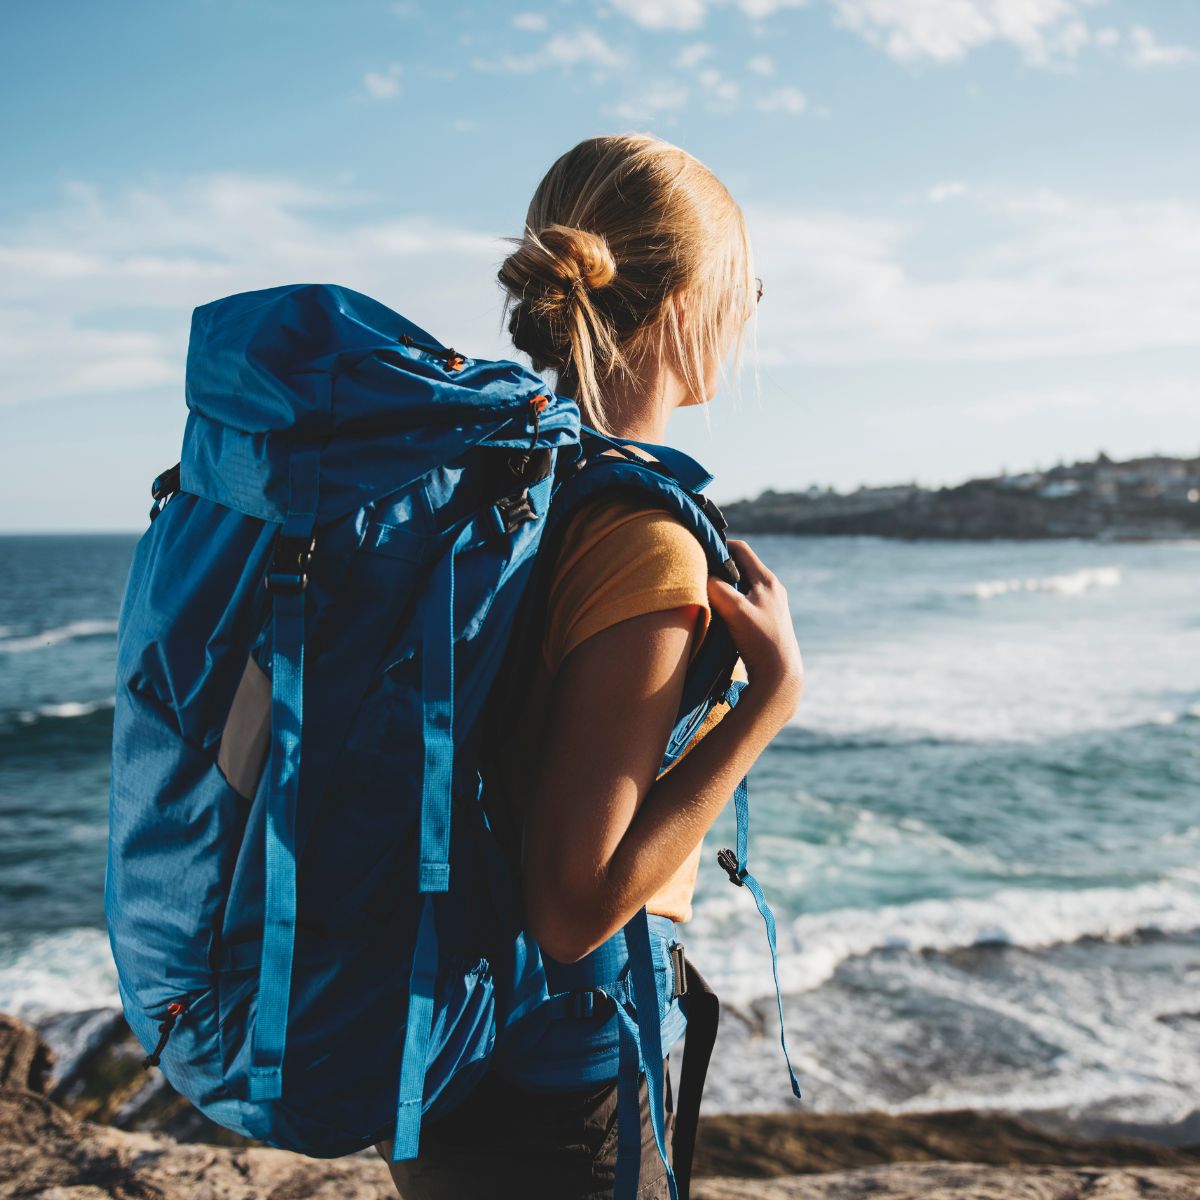 blonde female wearing a blue backpack by the water